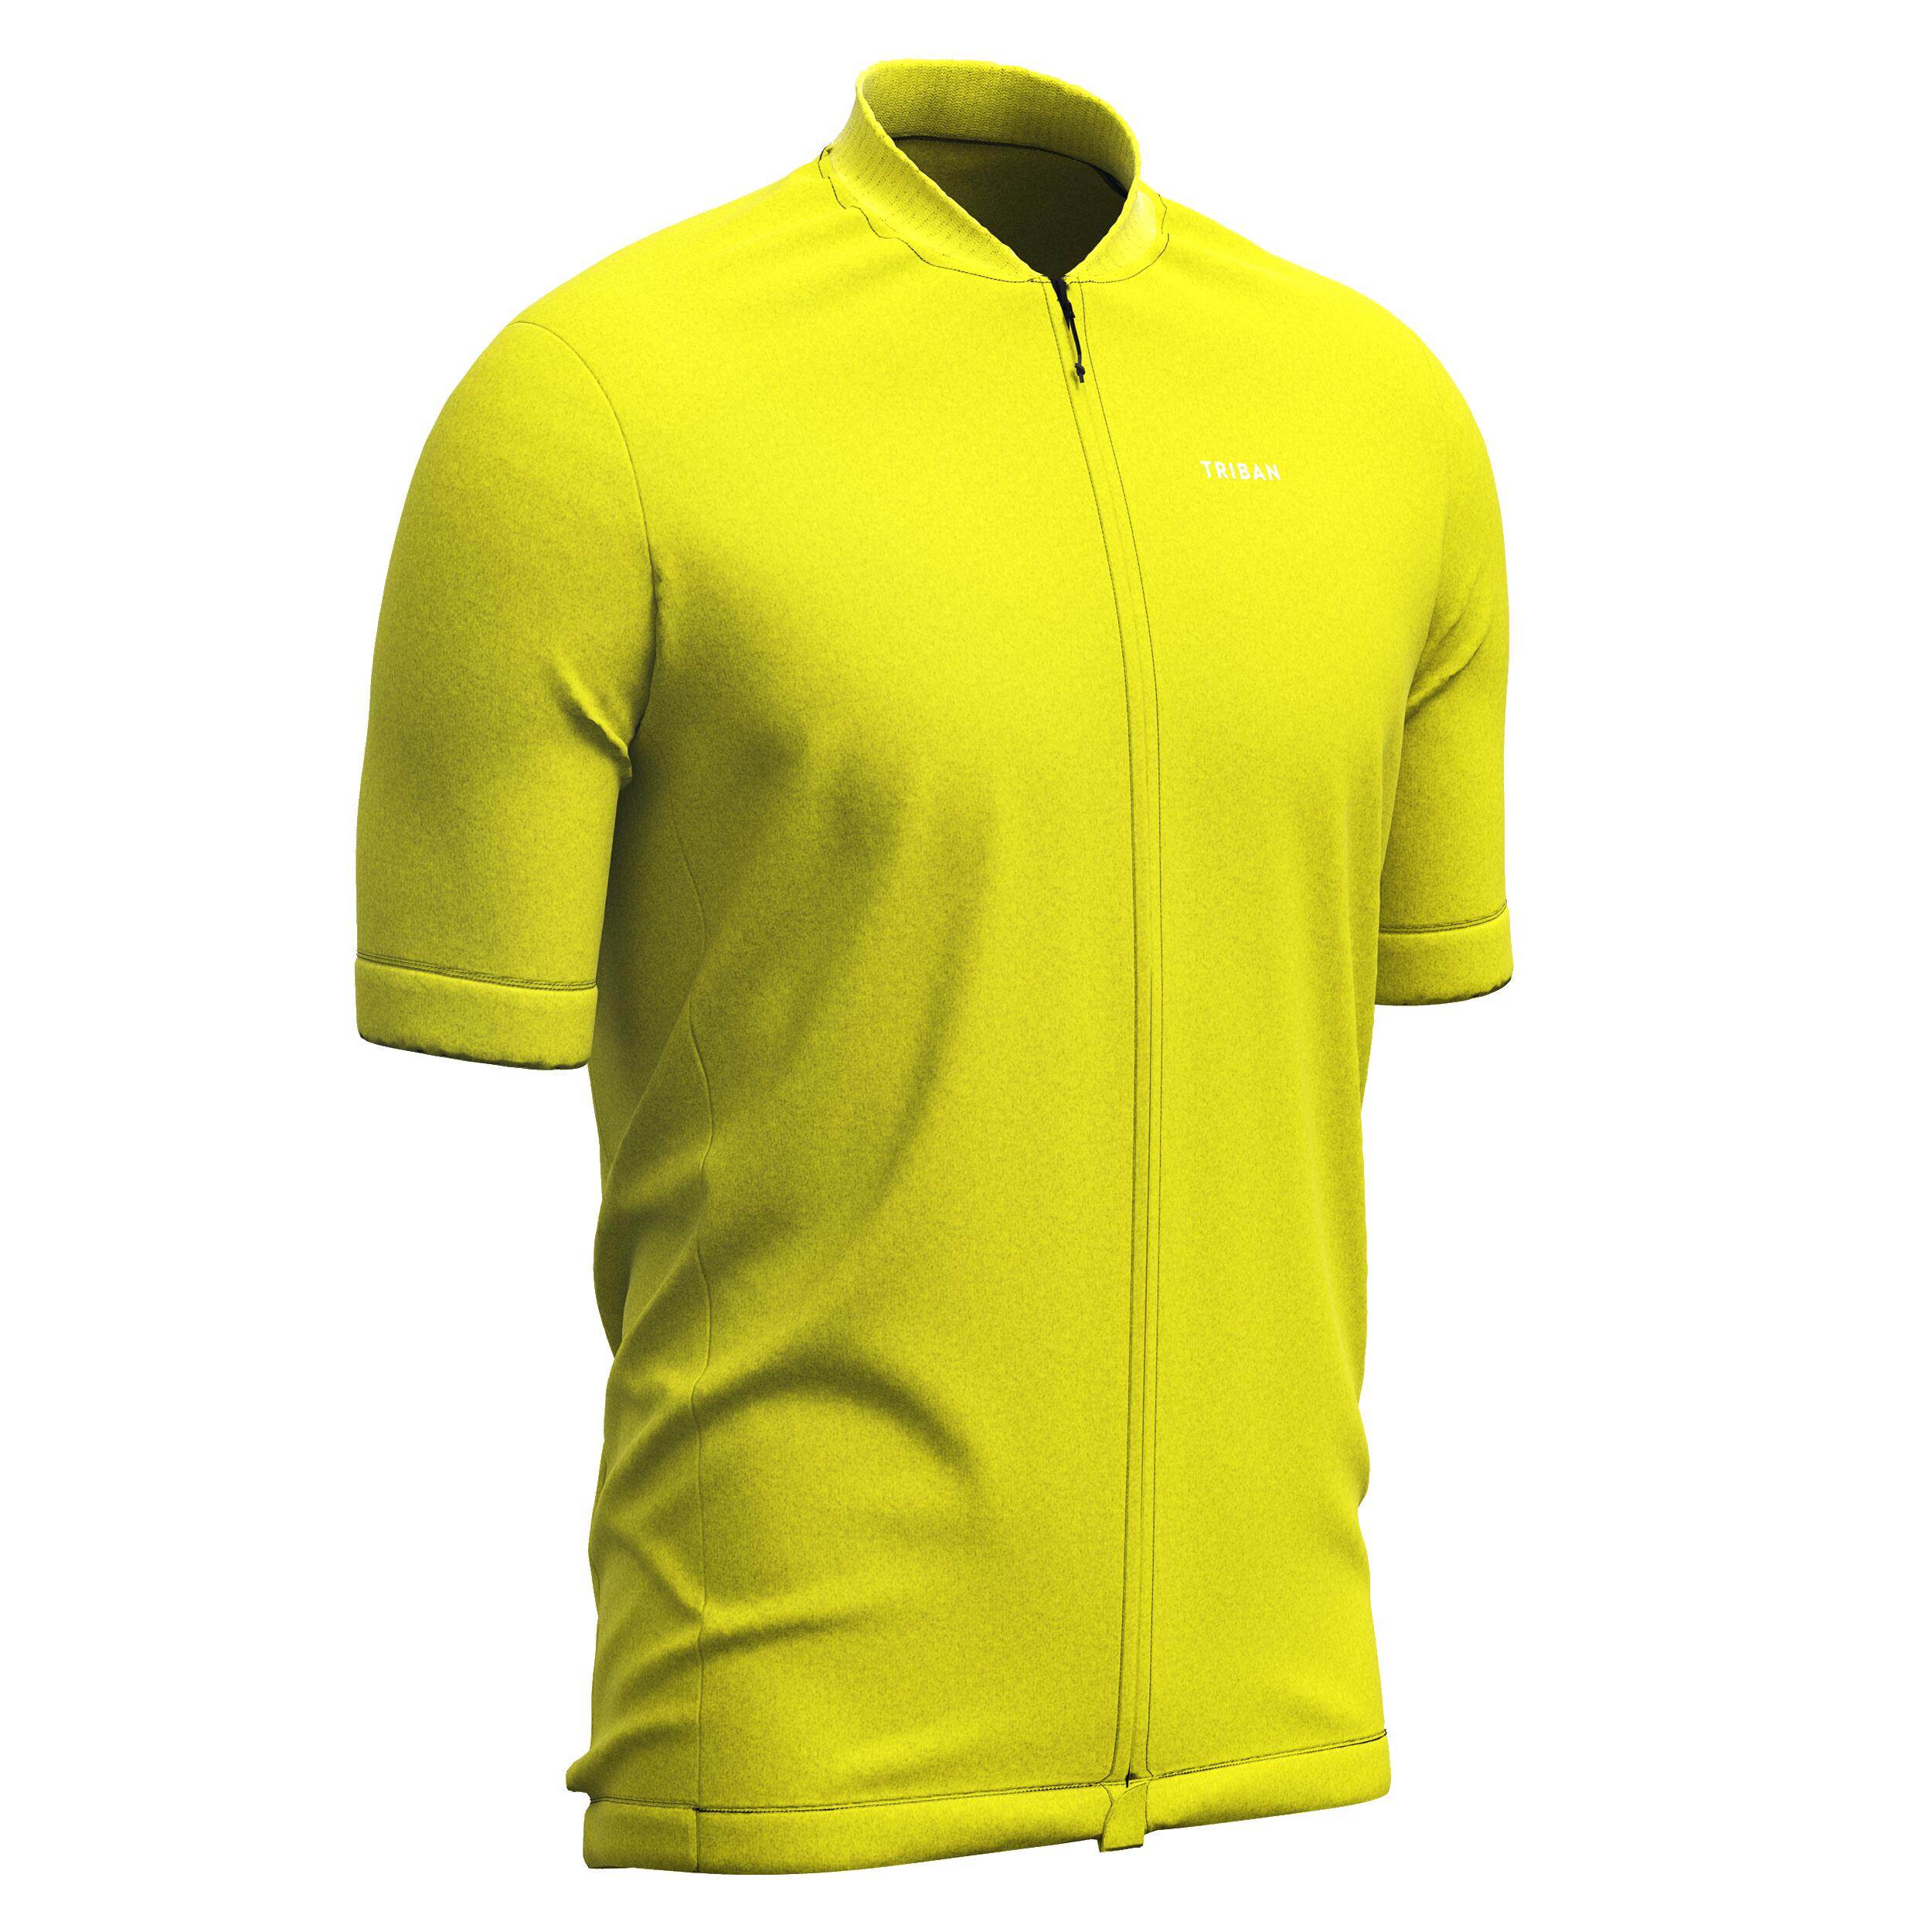 TRIBAN Men's Short-Sleeved Road Cycling Summer Jersey RC100 - Yellow